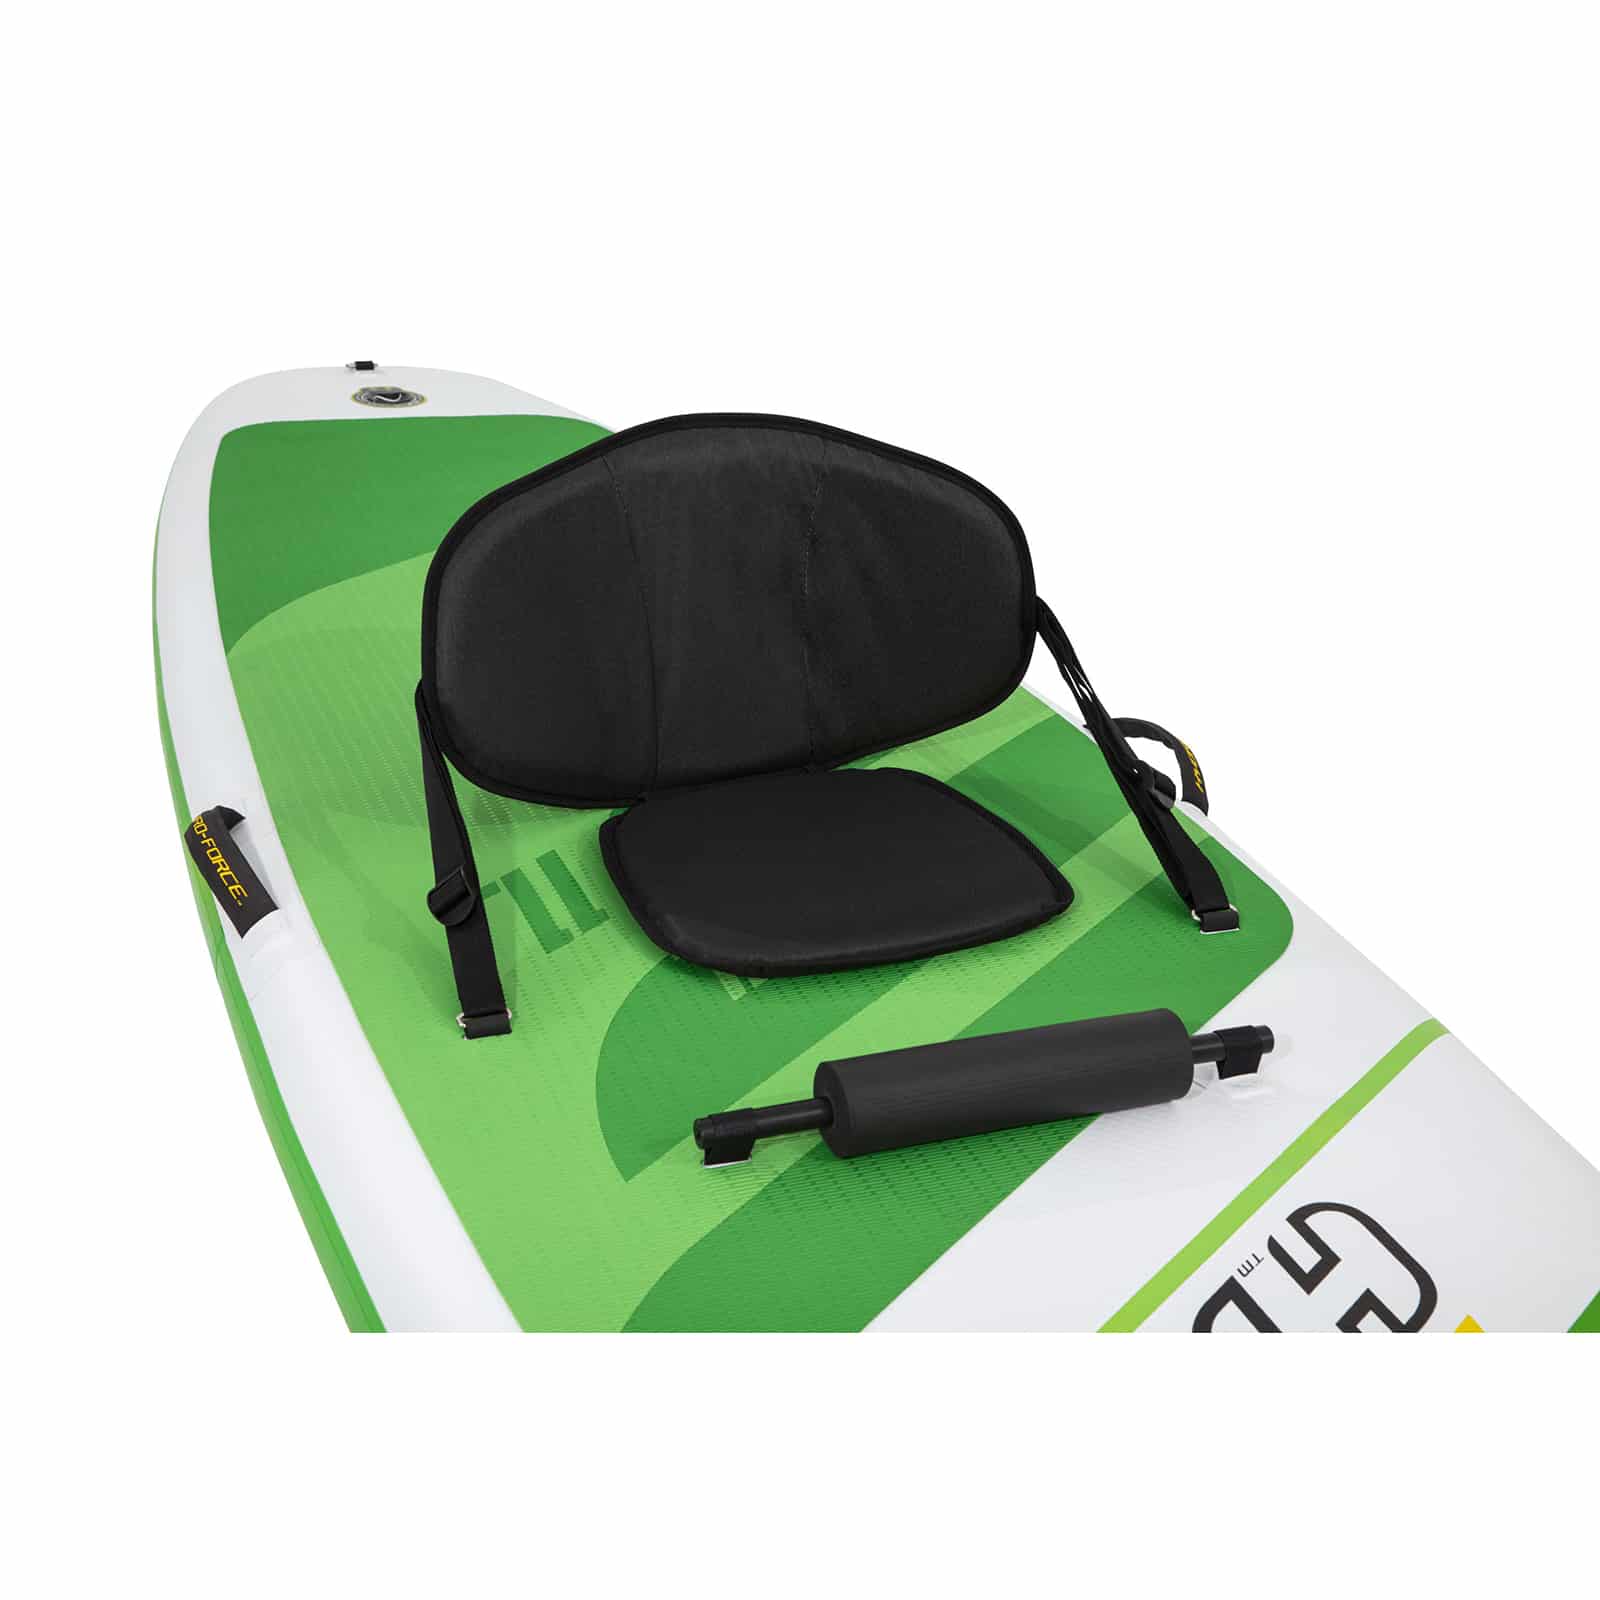 Tabla Paddle Surf Hinchable Bestway Hydro-force Freesoul Tech 340x89x15 Cm Con Remo, Asiento, Bomba  MKP